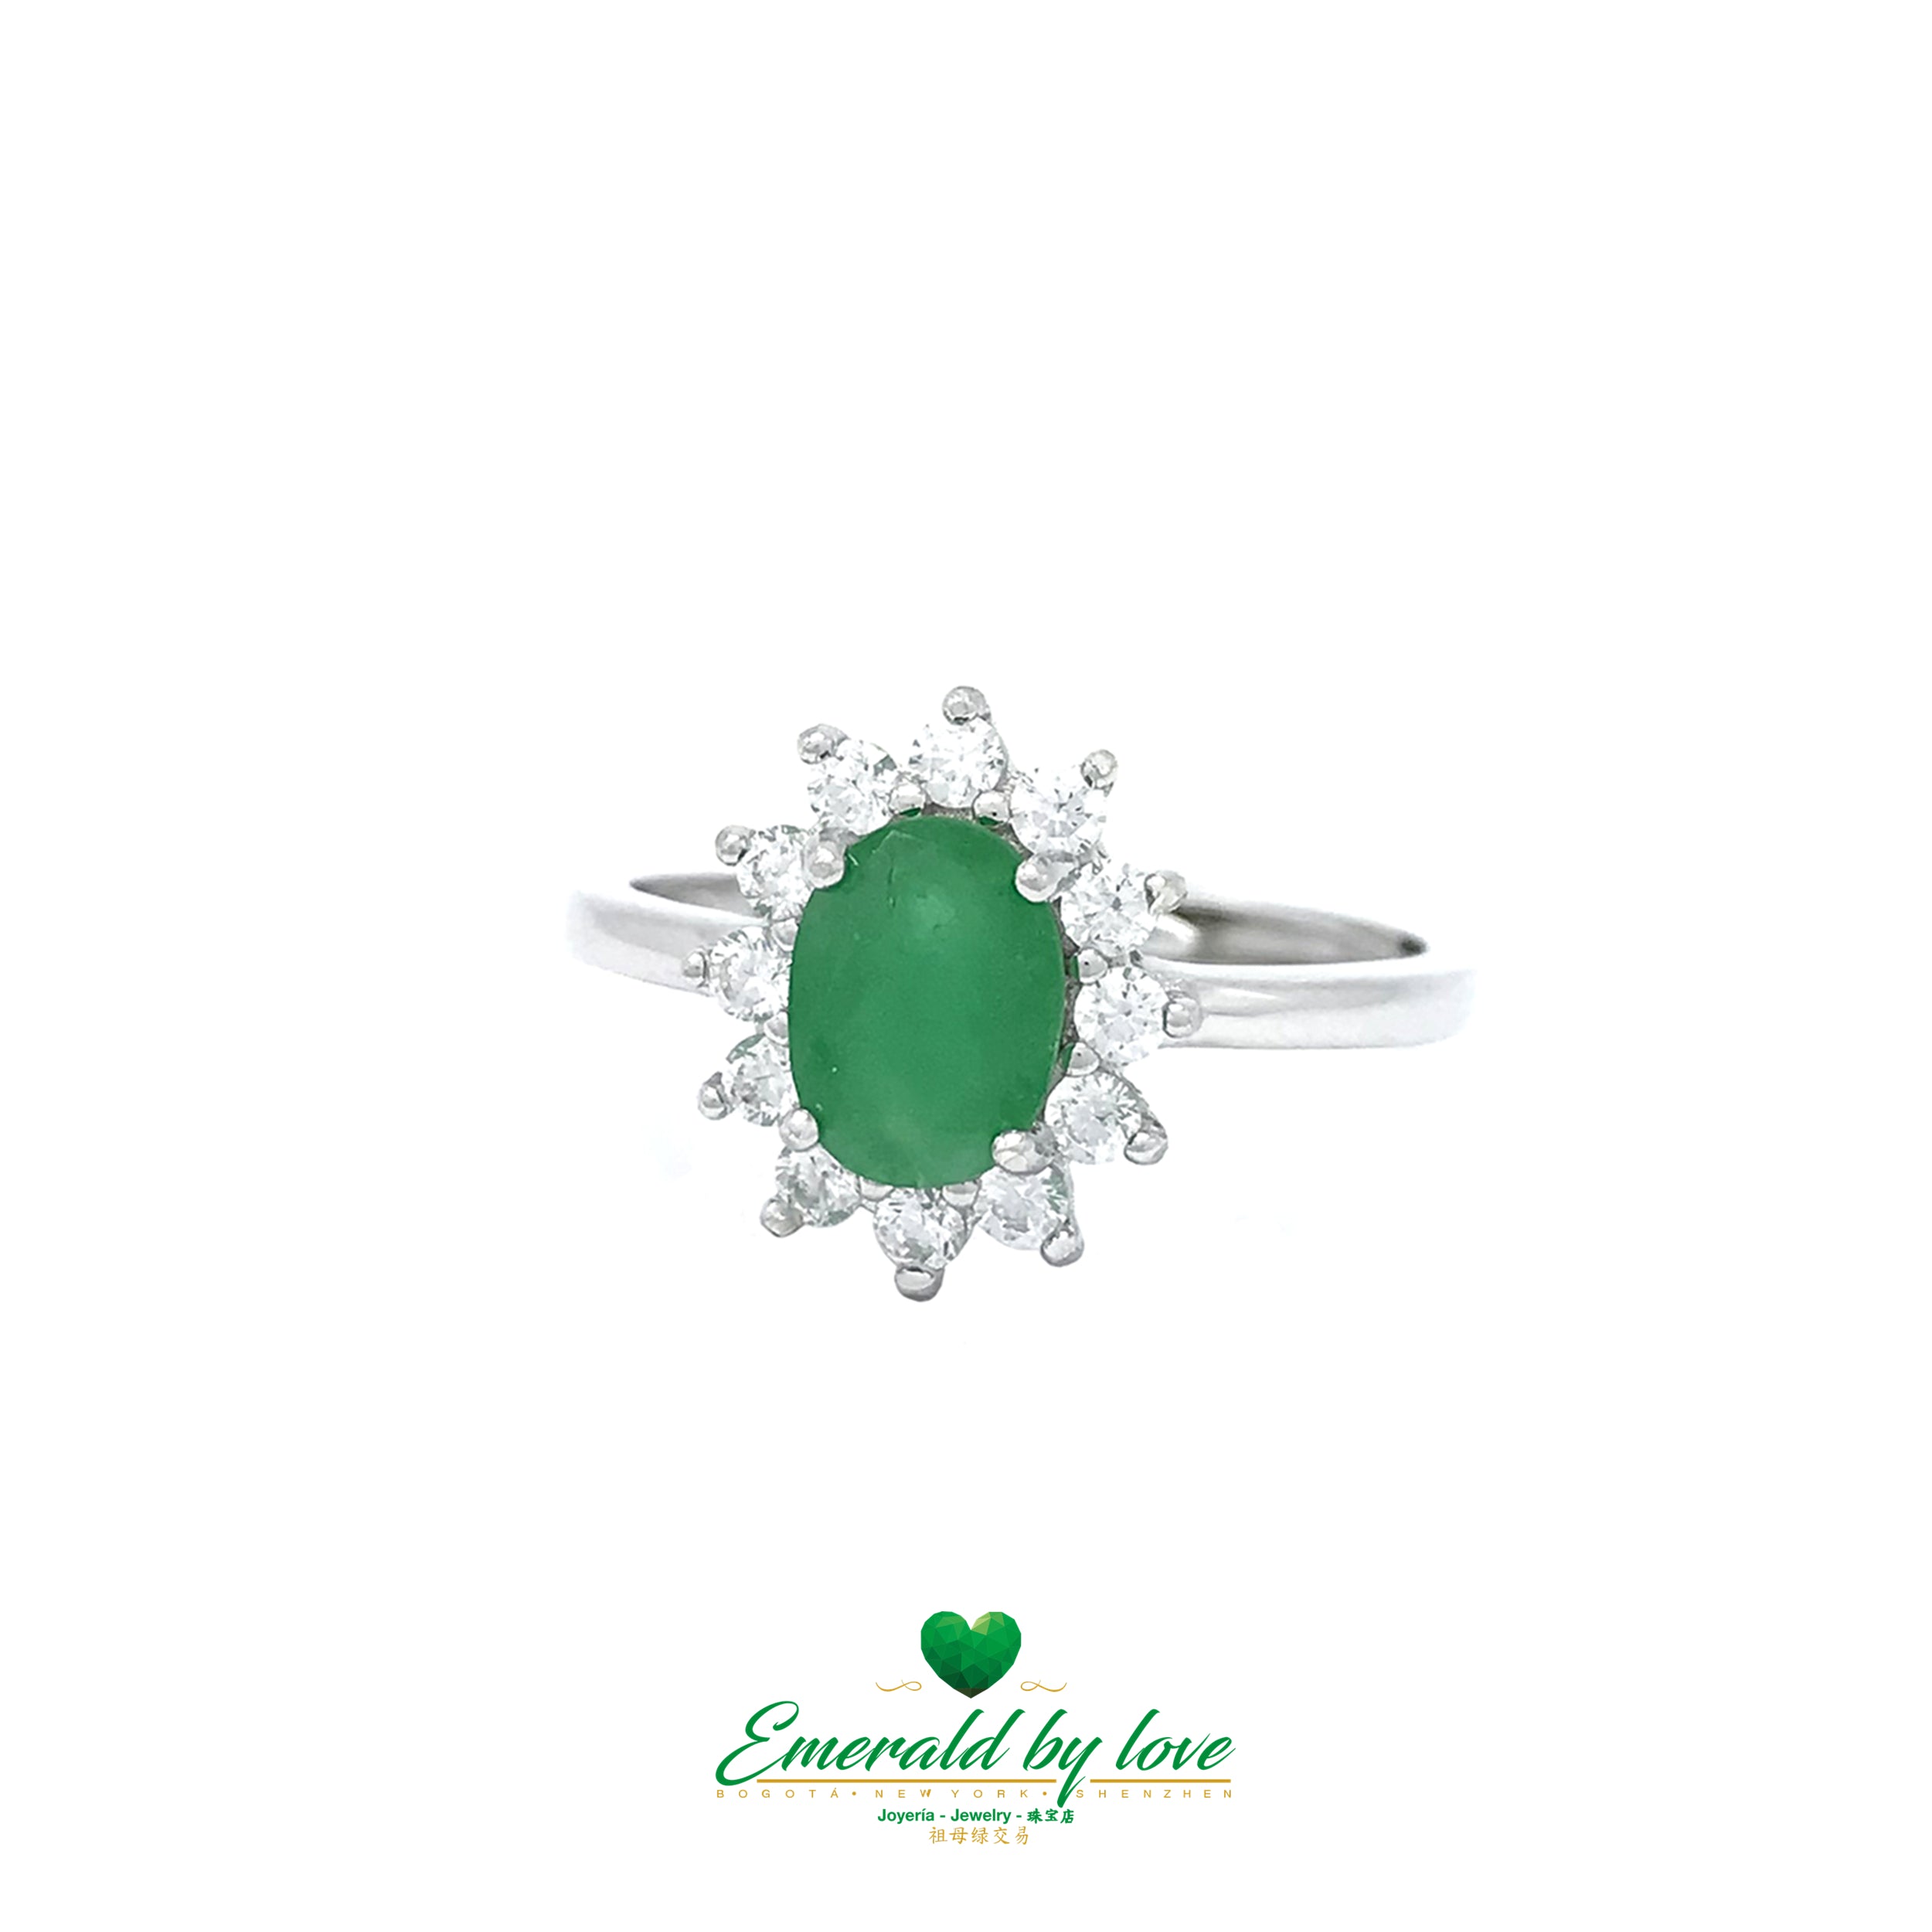 Elongated Marquise Silver Ring with Central Oval Emerald: Timeless Elegance